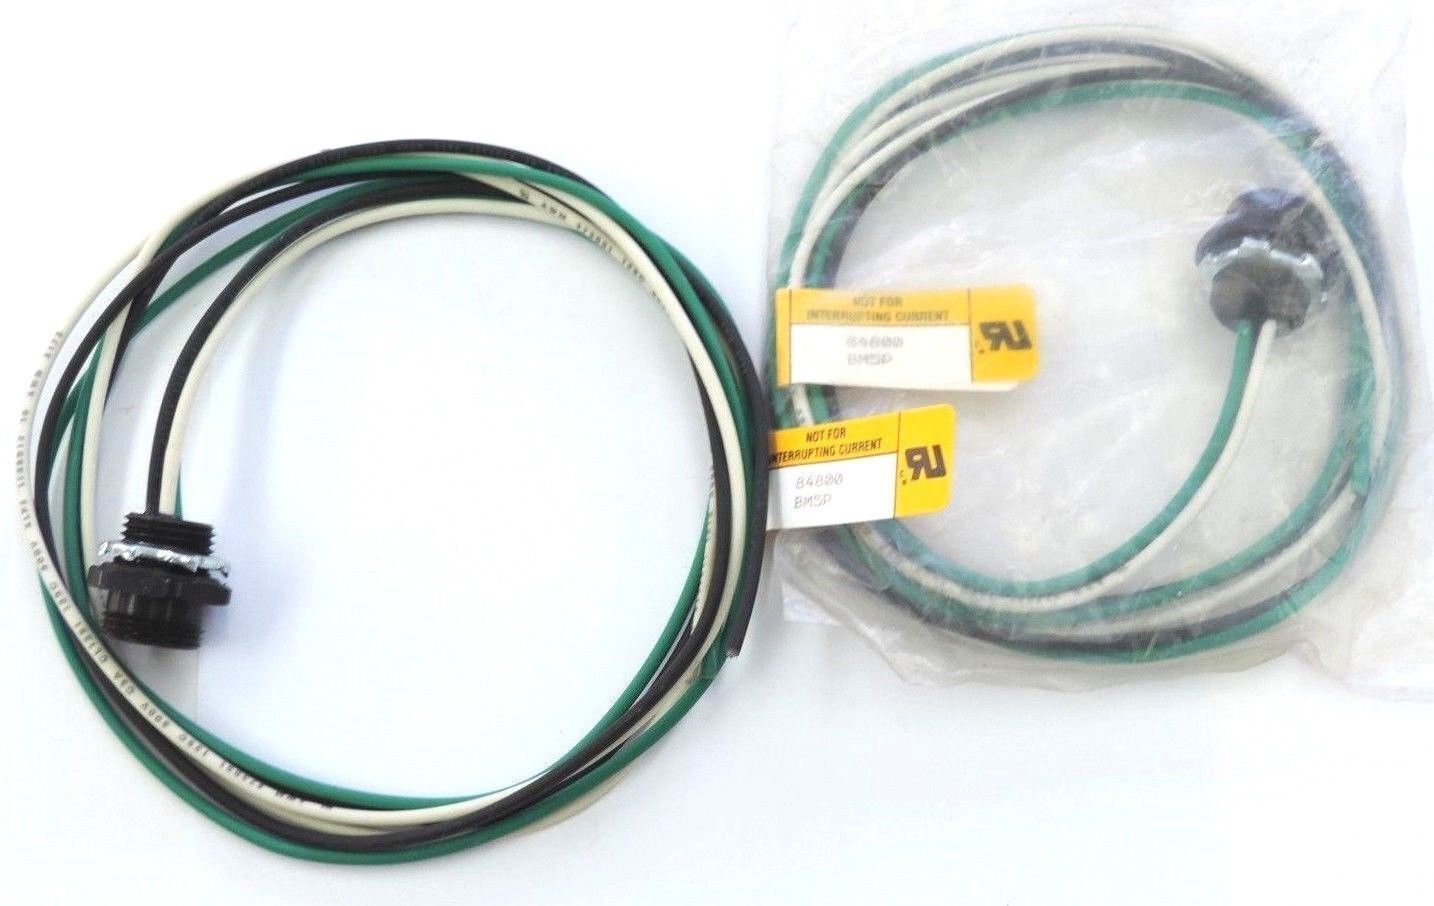 LOT OF 2 NEW TPC WIRE & CABLE SUPER-TREX QUICK-CONNECT 84800